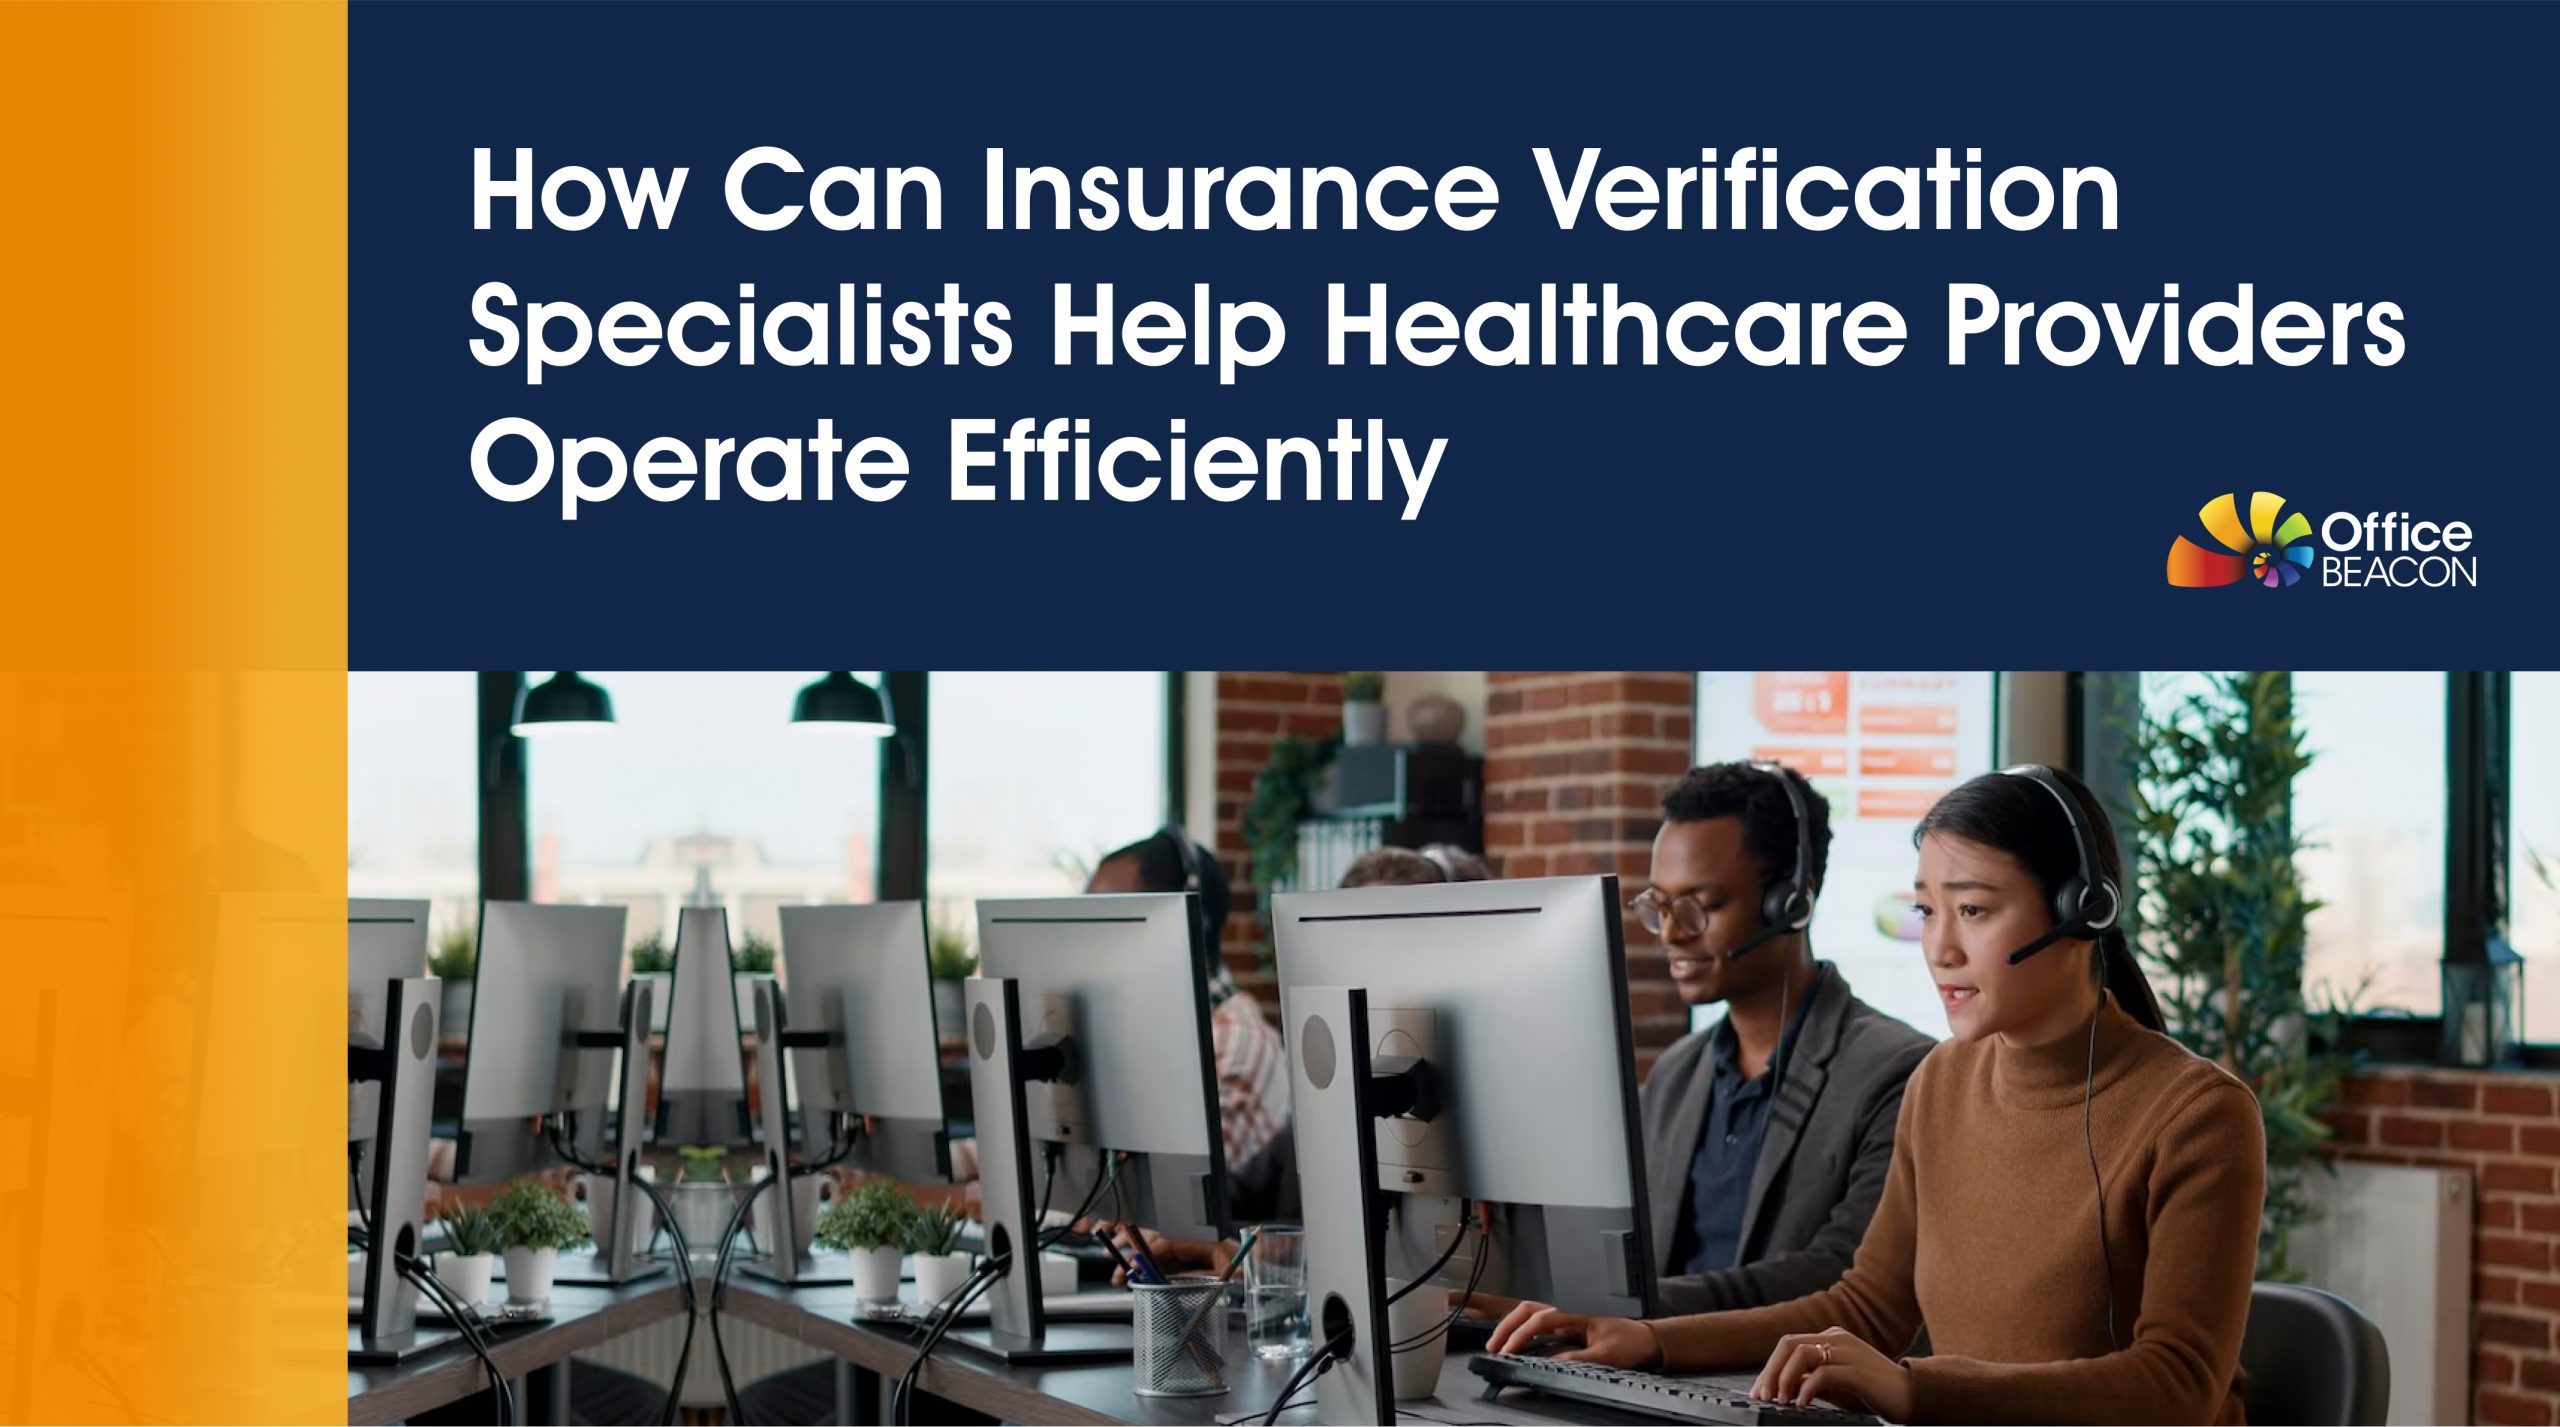 How Can Insurance Verification Specialists Help Healthcare Providers Operate Efficiently